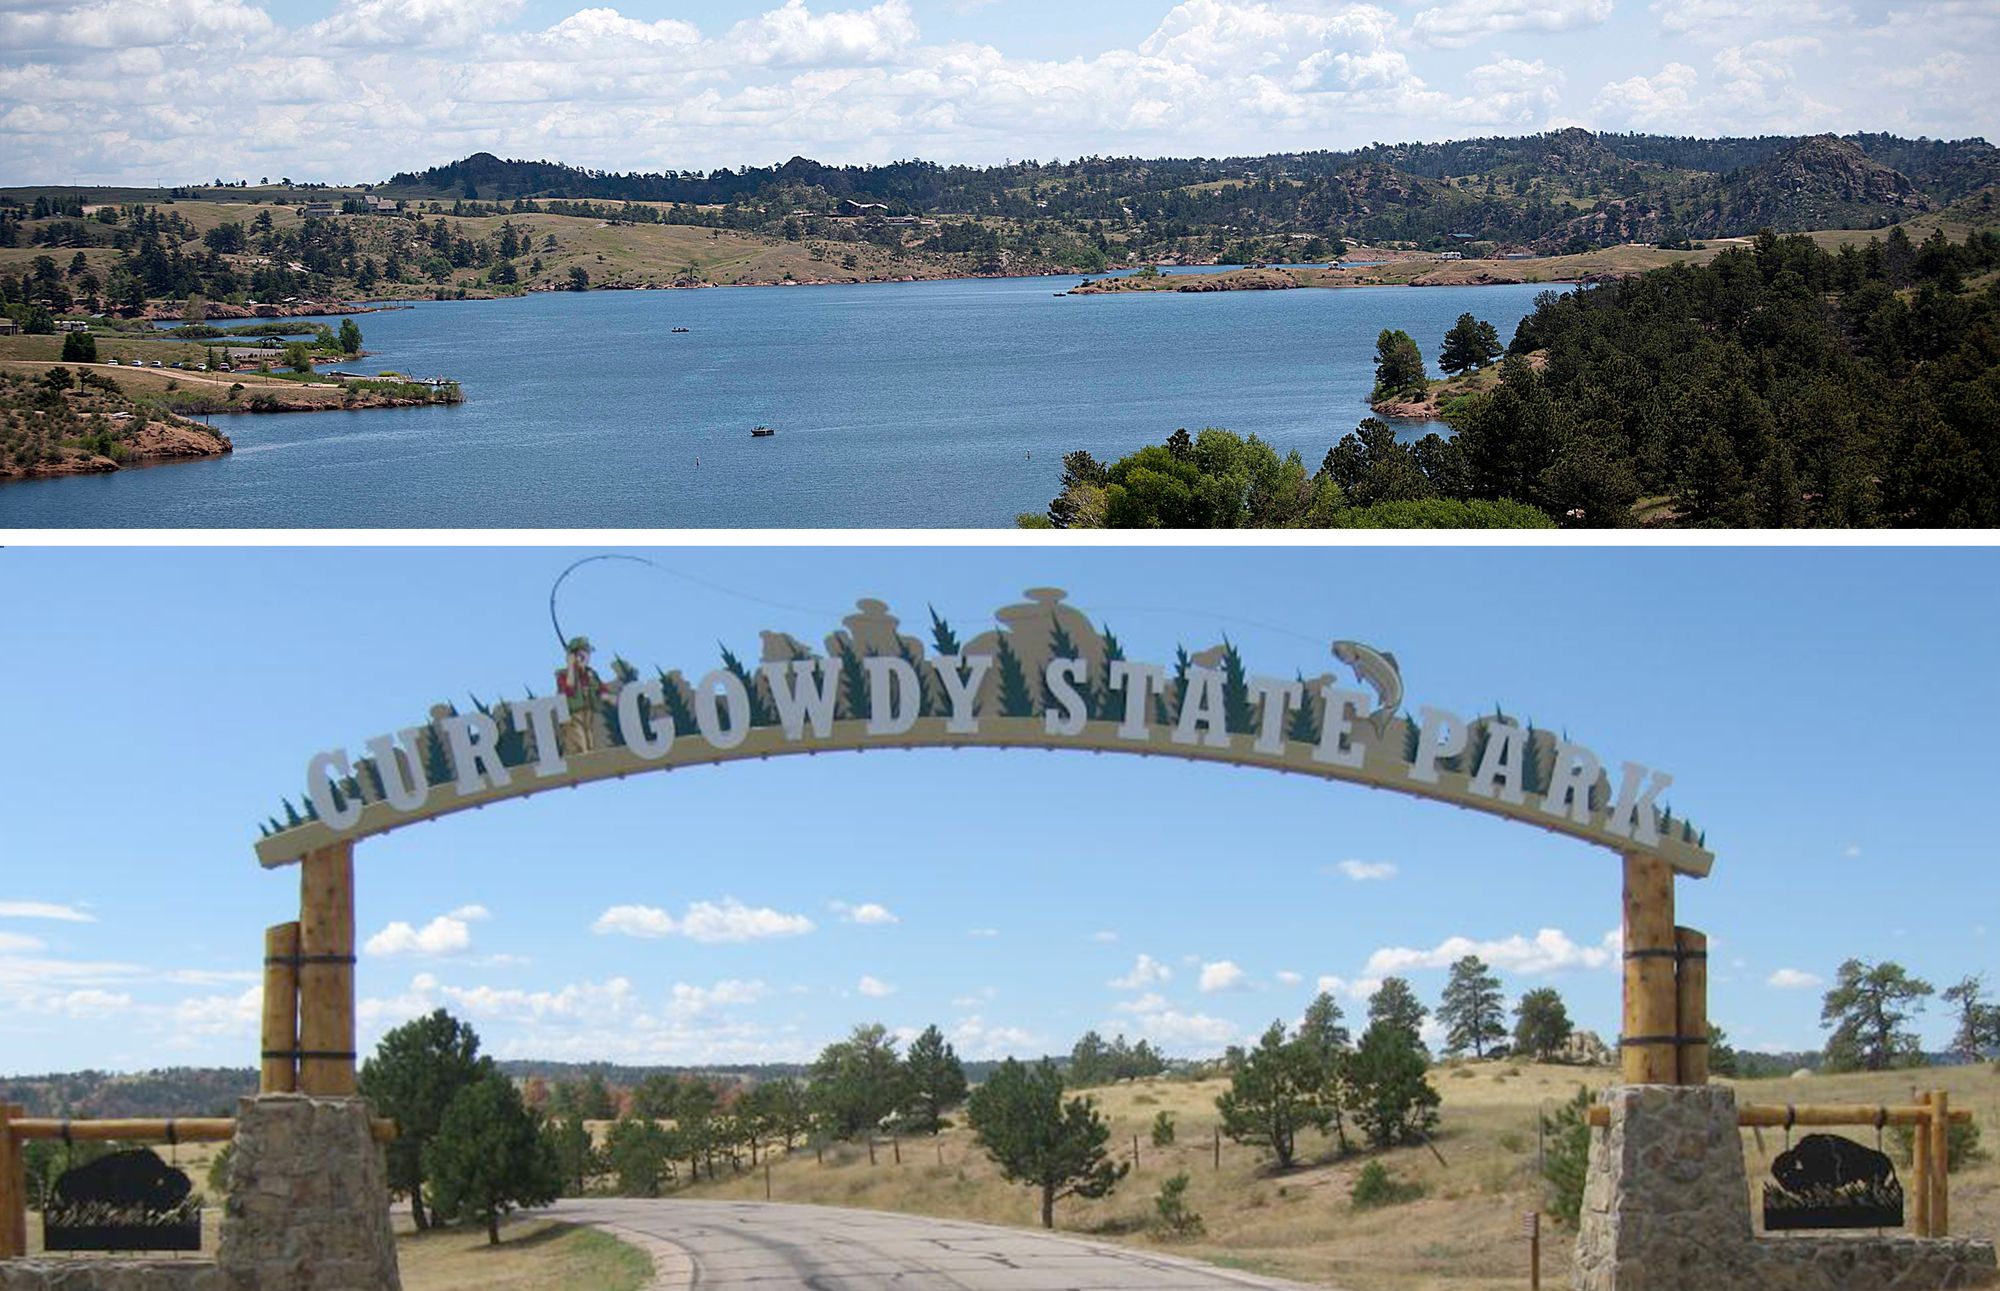 Curt Gowdy State Park Makes Top 5 List of State Parks In U.S.